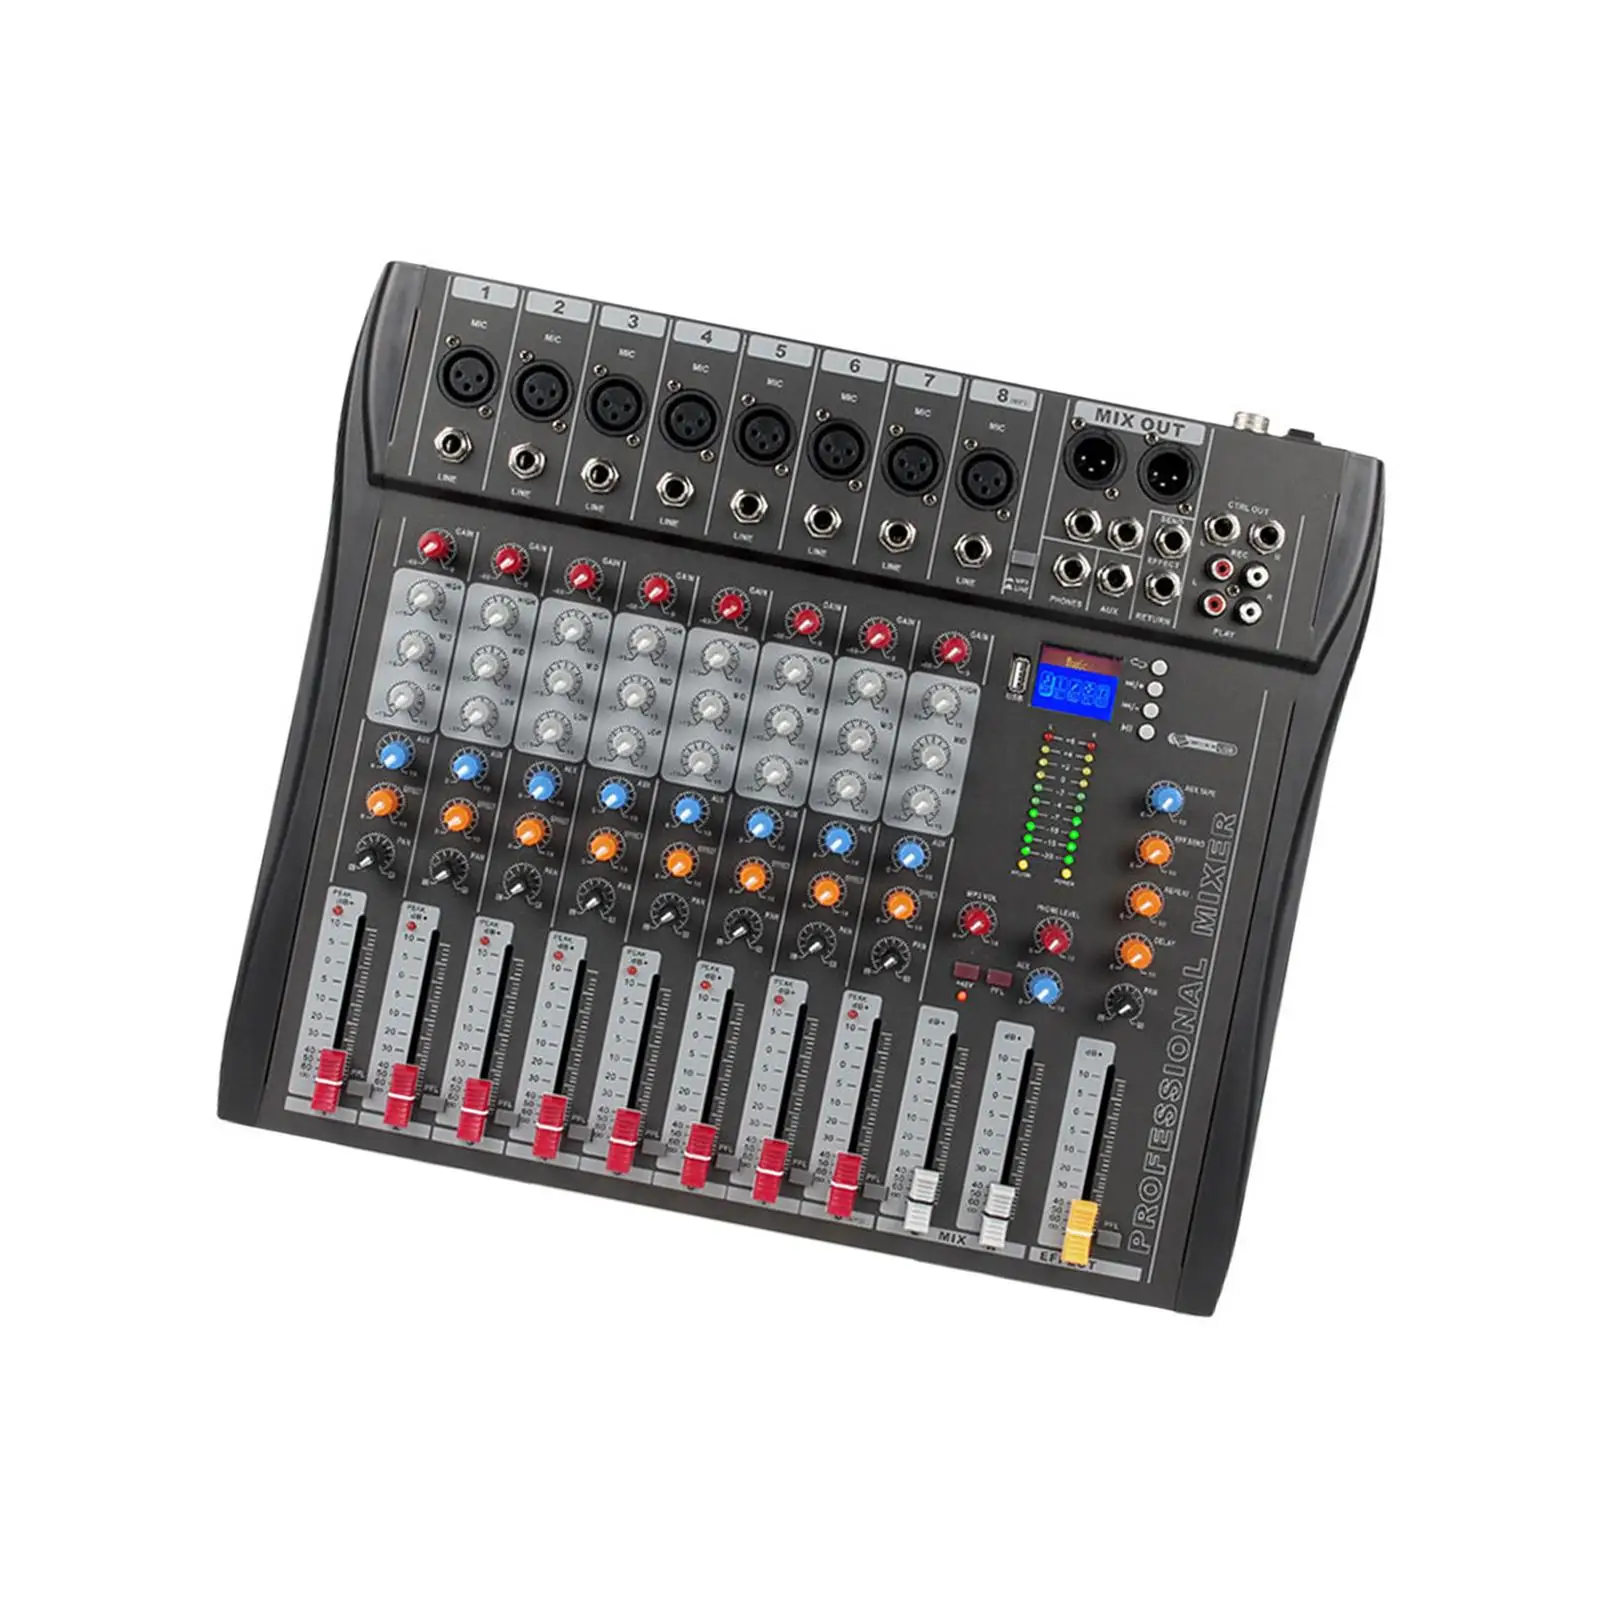 8 Channels Audio Mixer Digital Mixer EU Plug for Recording DJ Stage for Studio Recording Stable Transmission Durable Portable